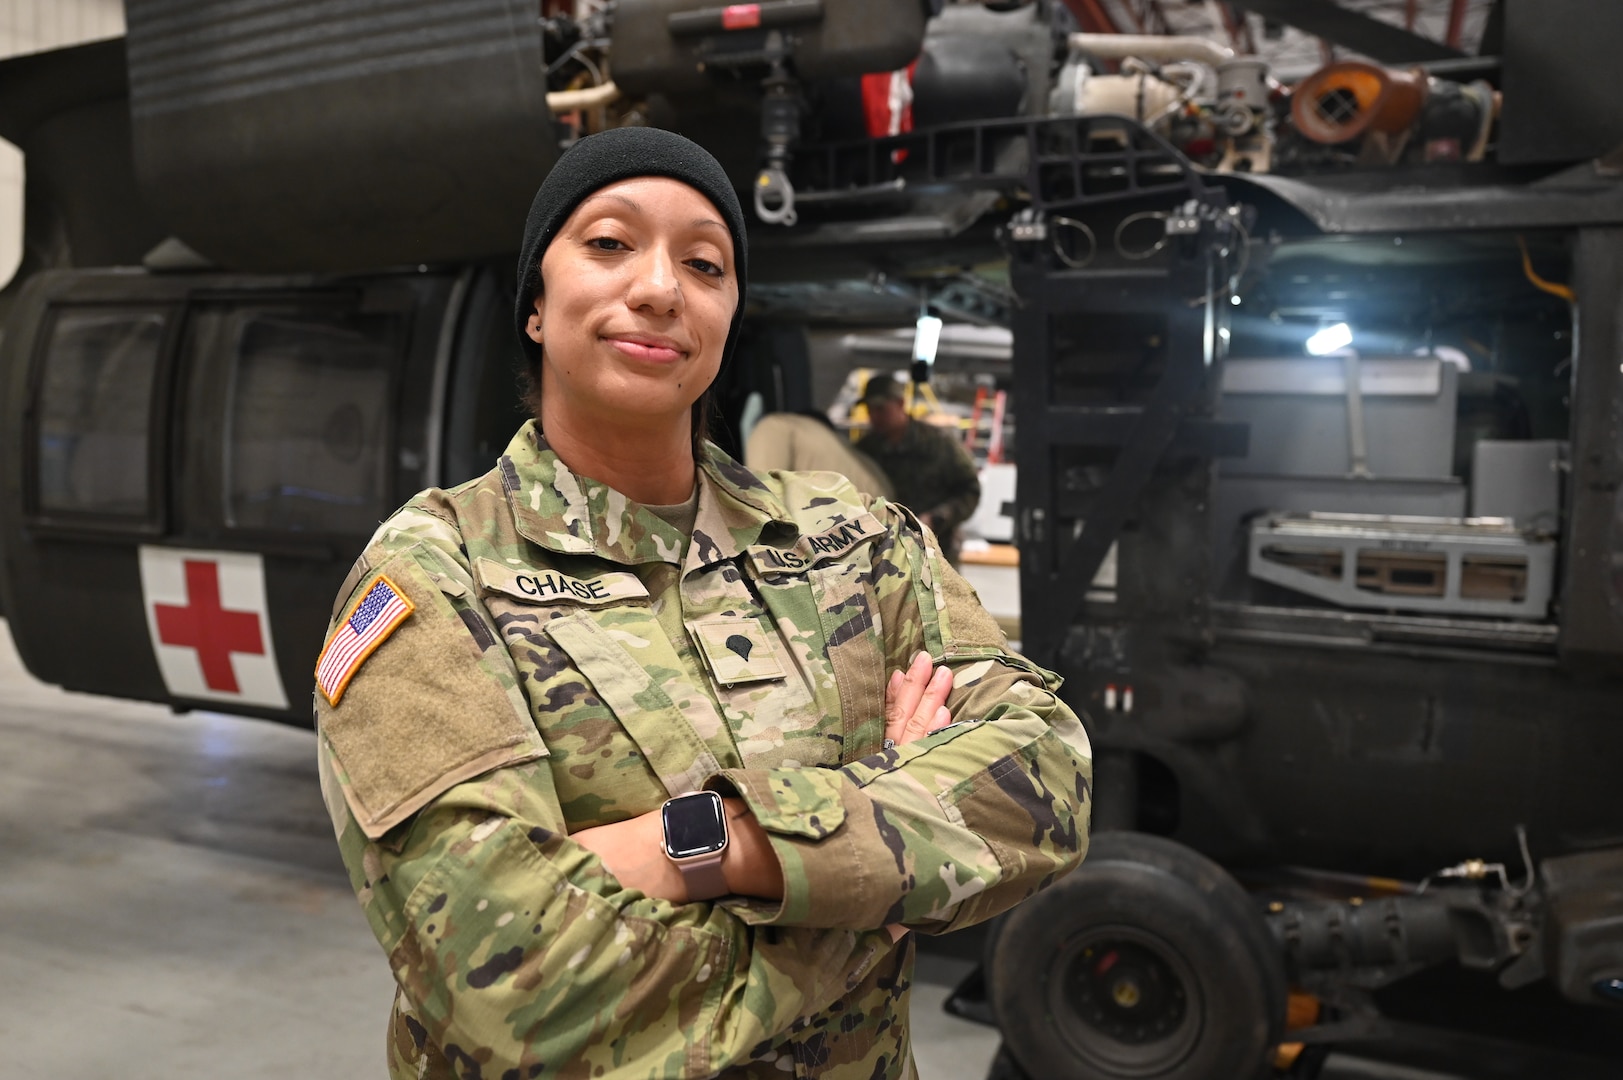 Cpl. Marquita Chase, avionic mechanic, District of Columbia Army National Guard Aviation, stands for a photograph at Davison Army Airfield, Feb. 3, 2024.  DCARNG Aviation is comprised of four different units with women visibly represented in all sections to include pilots, maintainers, supply, operations, administration, and flight paramedics.